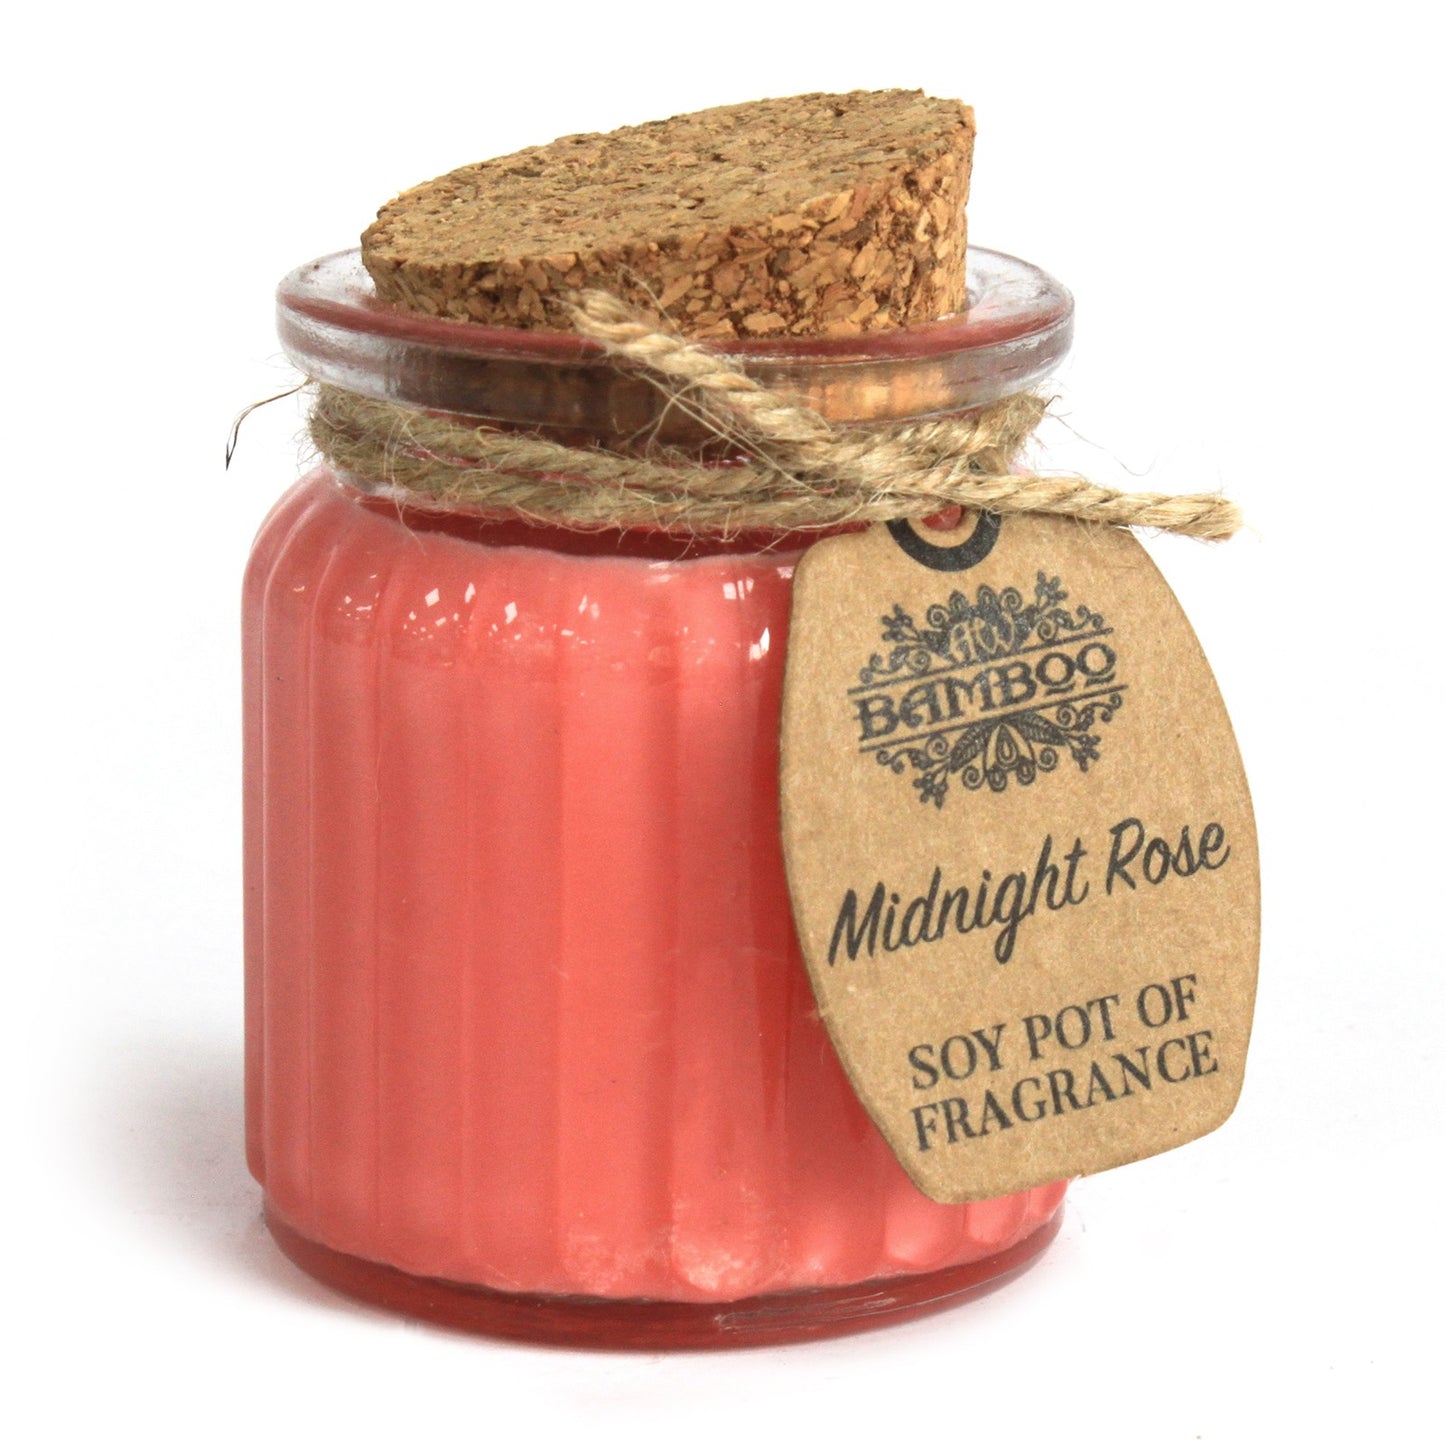 Midnight Rose Soy Pot of Fragrance Candles ( Pack of Two )